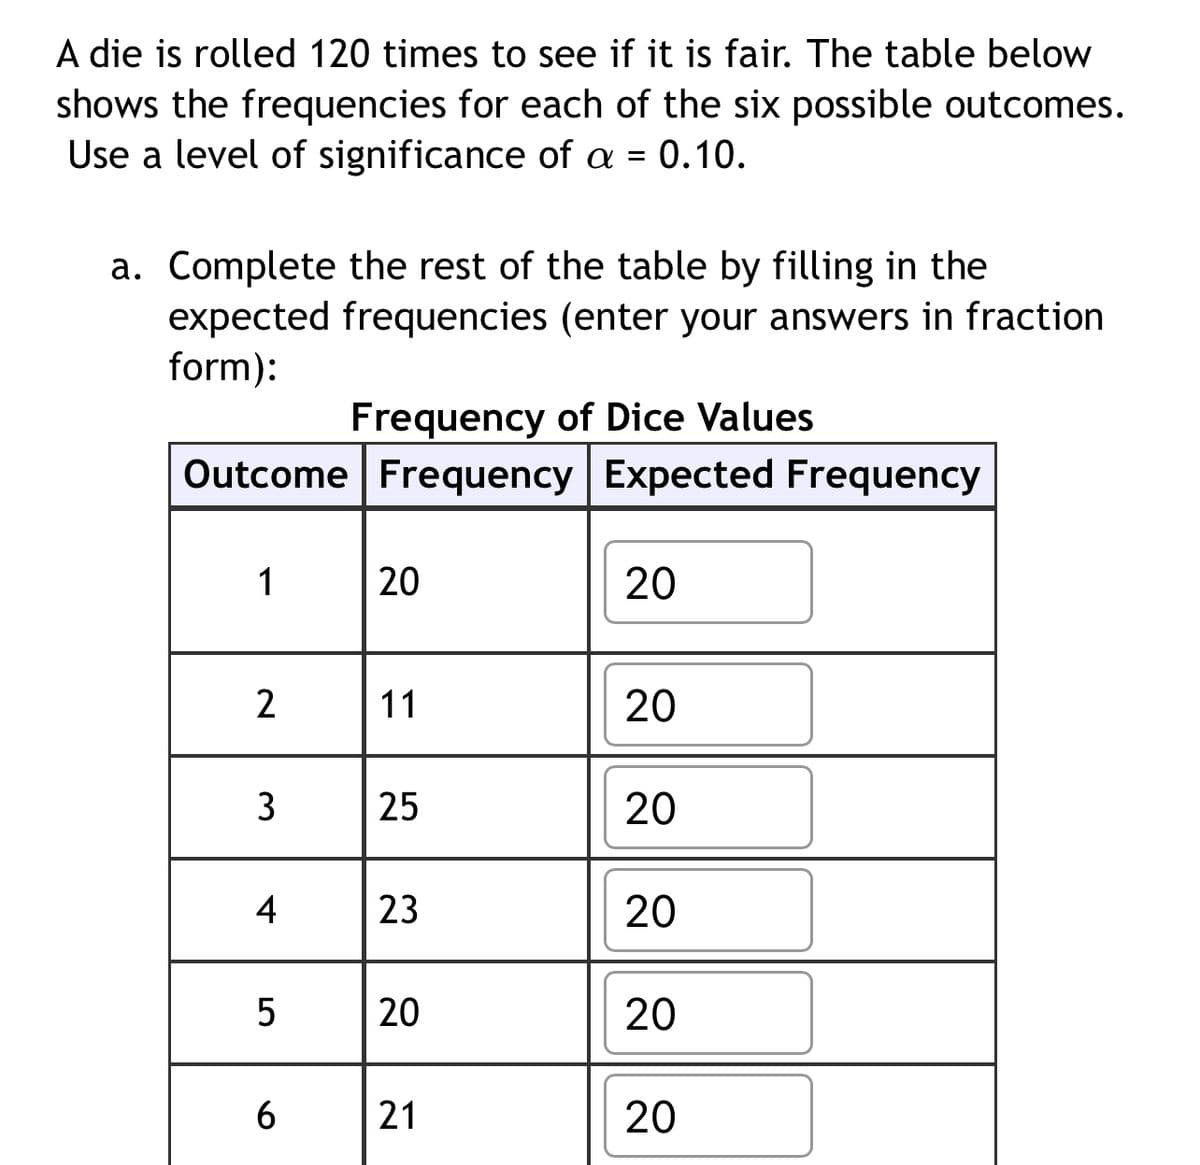 A die is rolled 120 times to see if it is fair. The table below
shows the frequencies for each of the six possible outcomes.
Use a level of significance of a = 0.10.
a. Complete the rest of the table by filling in the
expected frequencies (enter your answers in fraction
form):
Frequency of Dice Values
Outcome Frequency Expected Frequency
1
20
20
11
20
3
25
20
4
23
20
20
20
6
20
21
